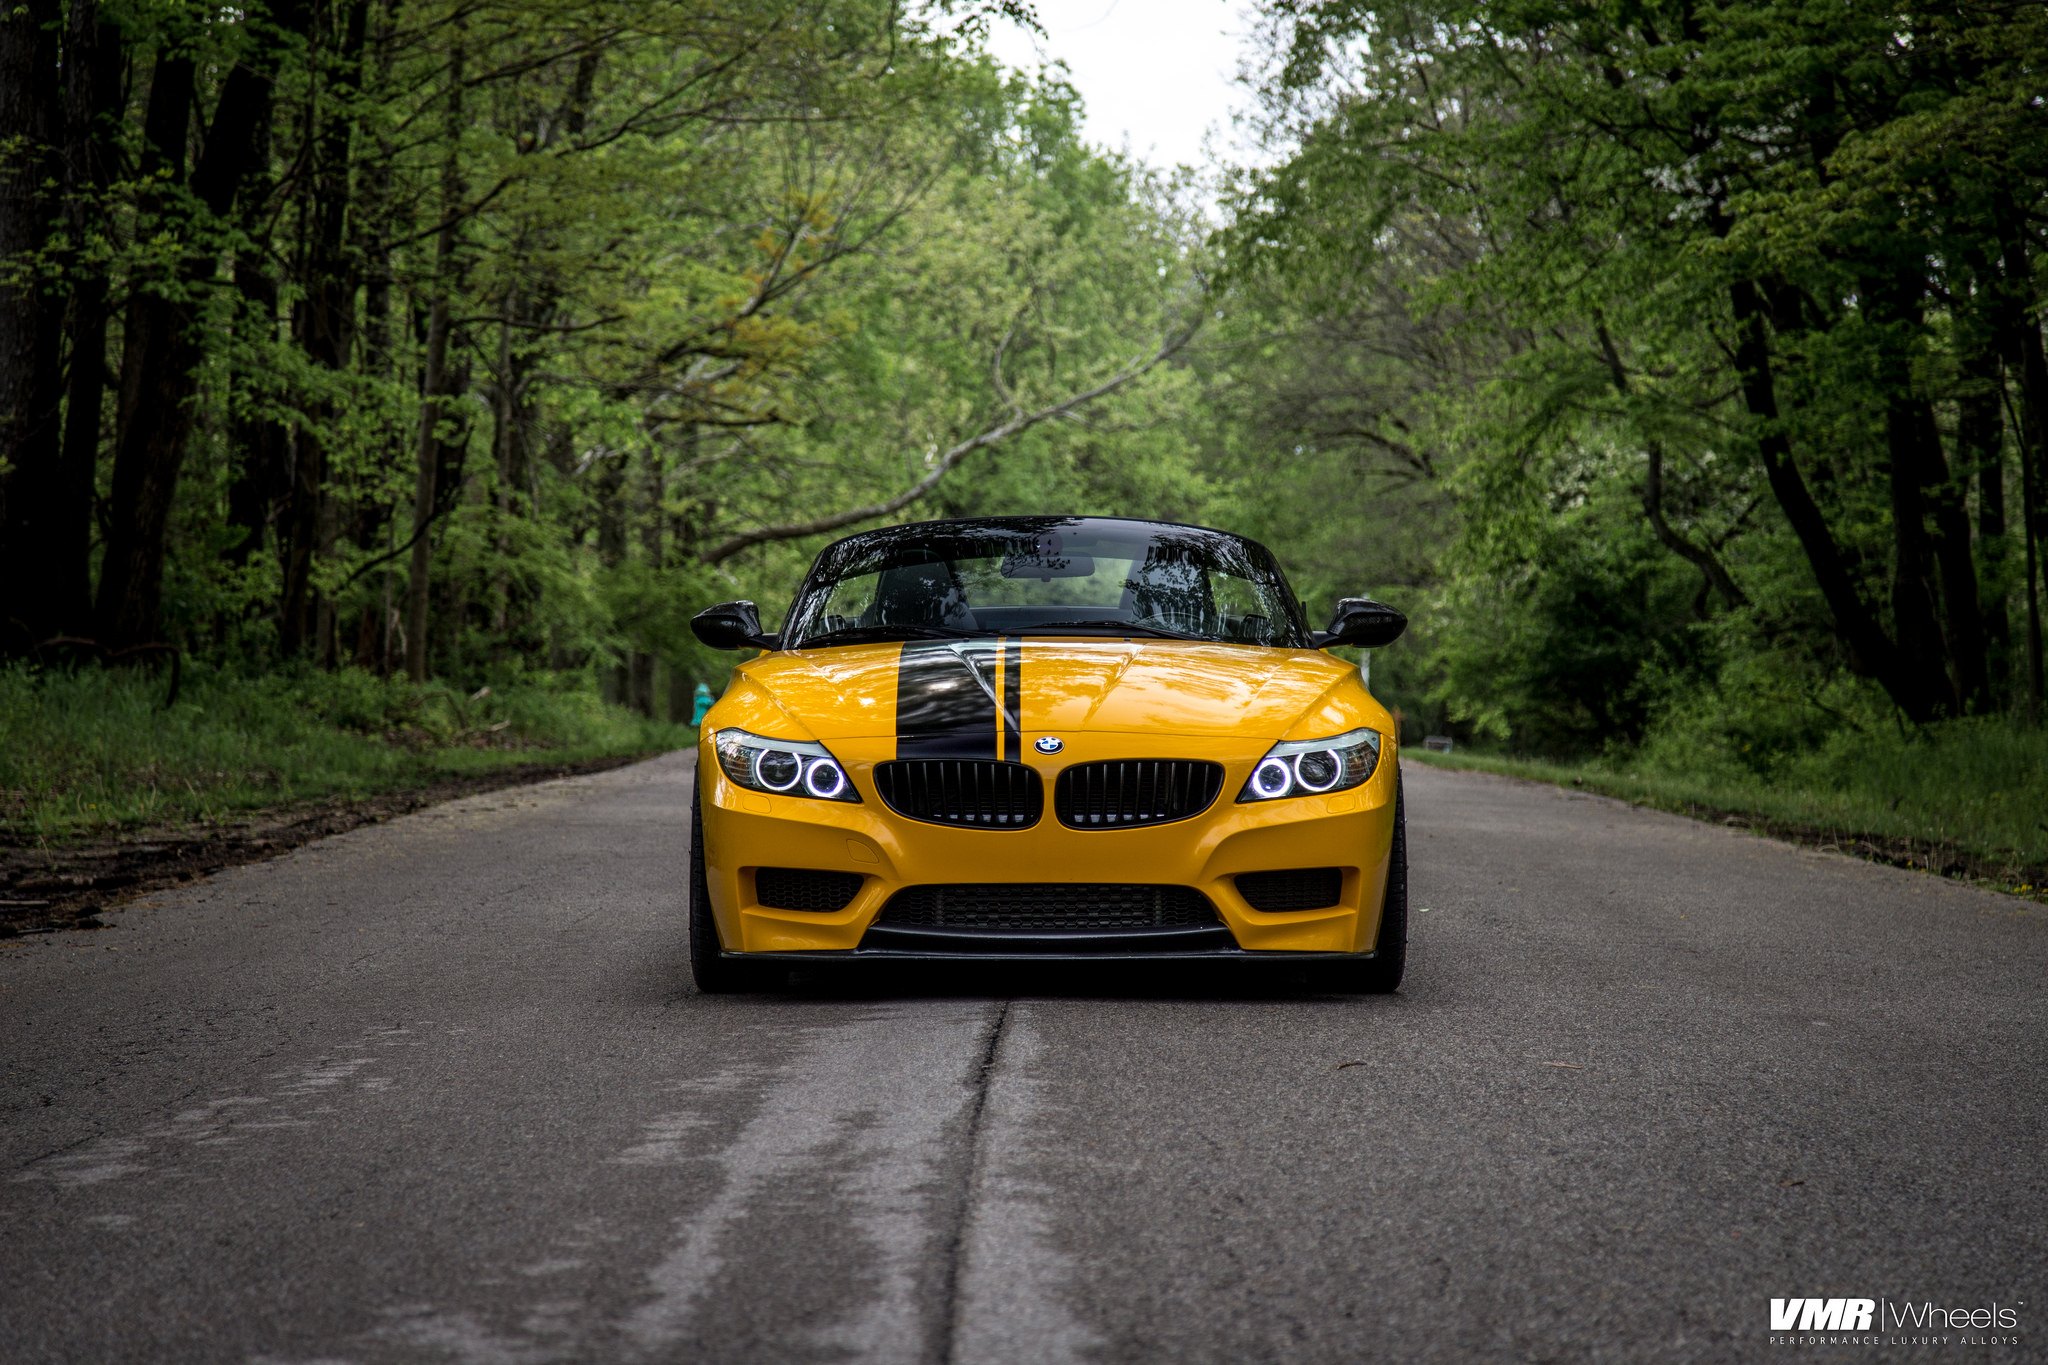 Aftermarket Halo Headlights on Yellow BMW Z4 - Photo by VMR wheels